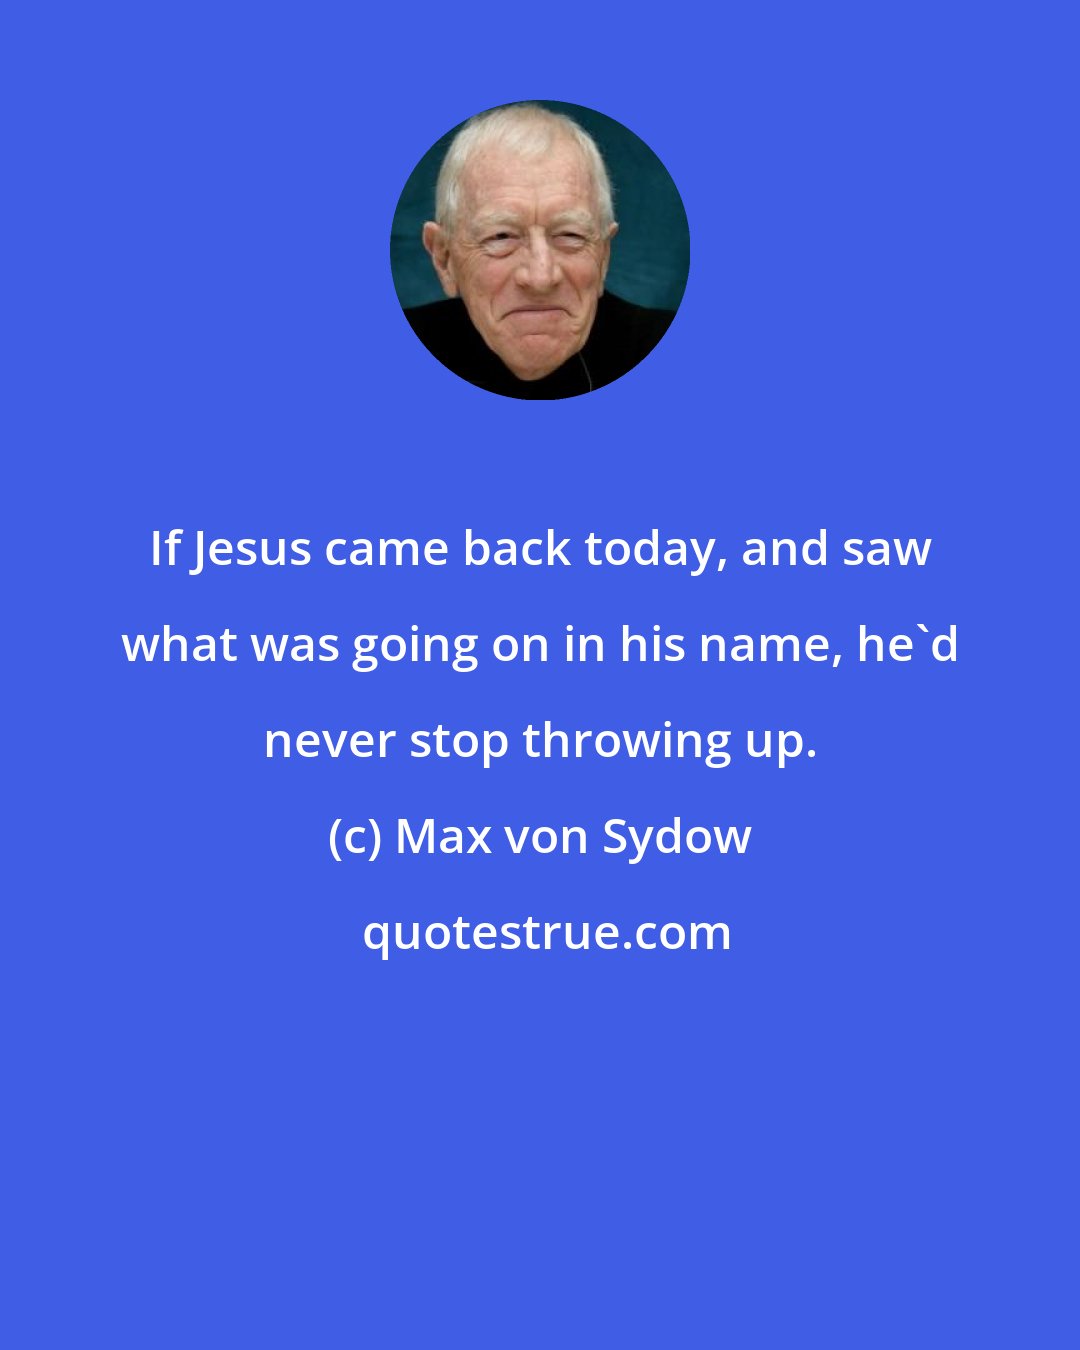 Max von Sydow: If Jesus came back today, and saw what was going on in his name, he'd never stop throwing up.